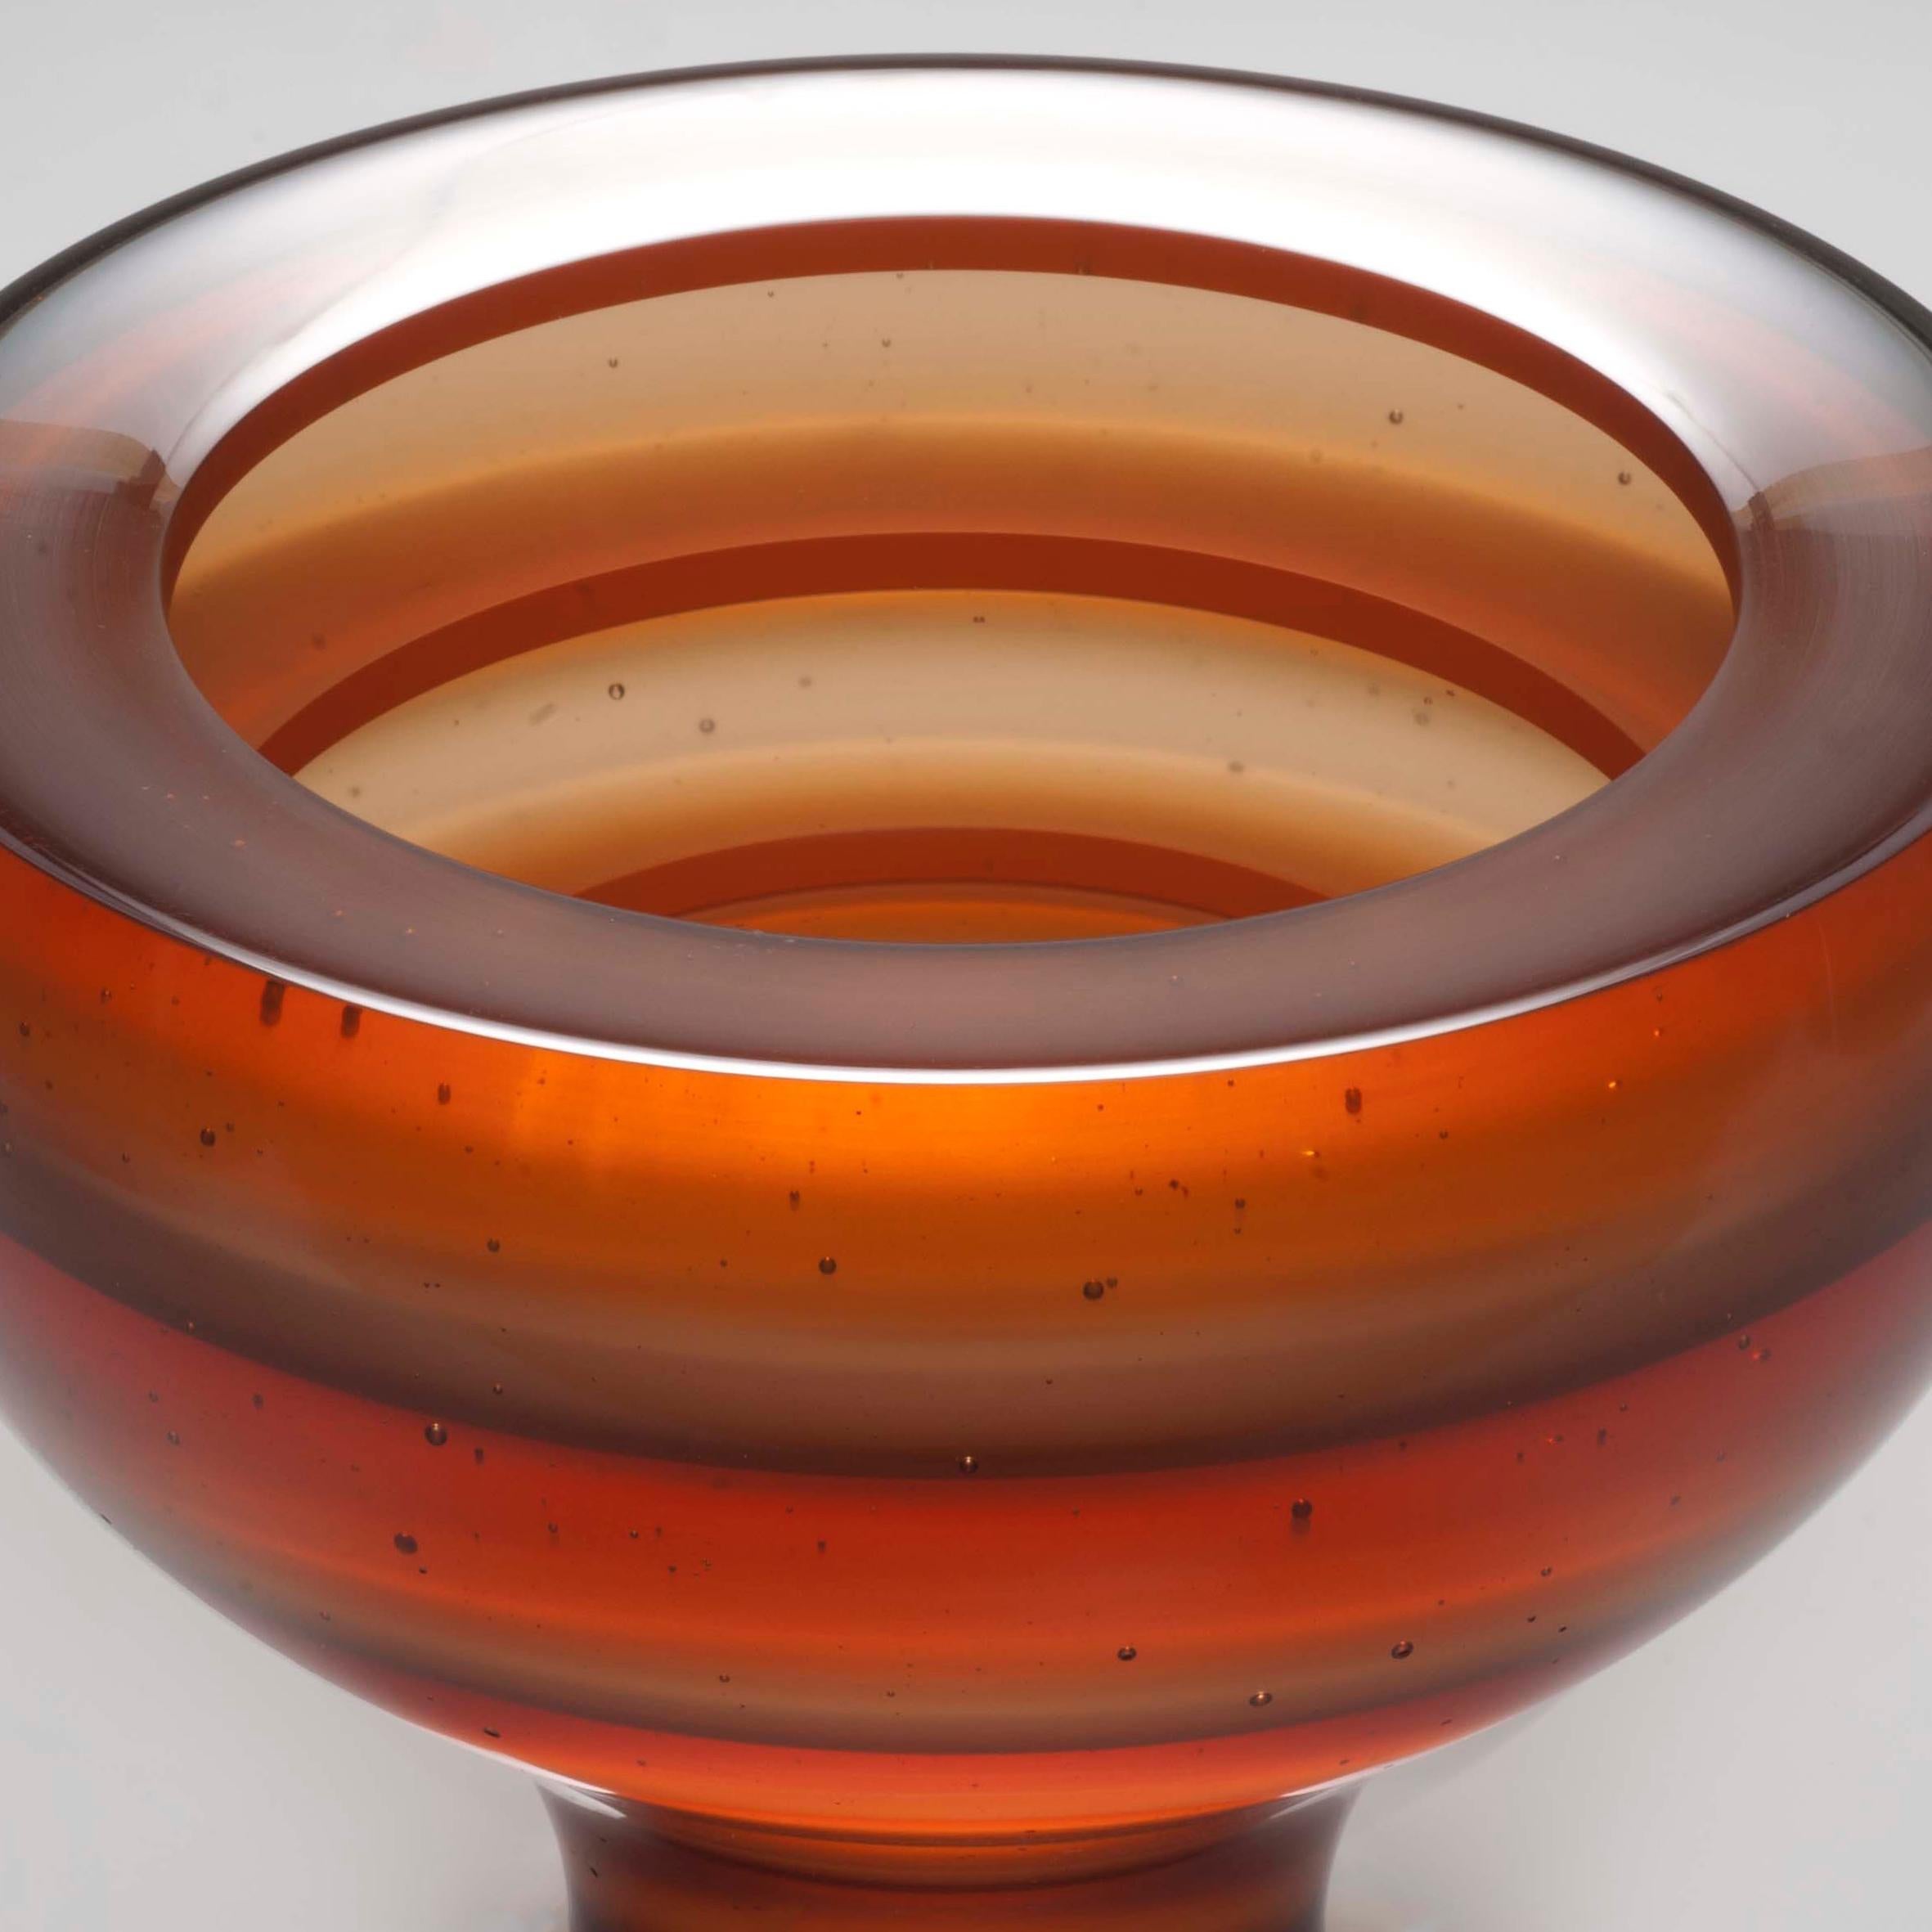 Modern Luka, a unique amber / orange glass art work and centrepiece by Paul Stopler